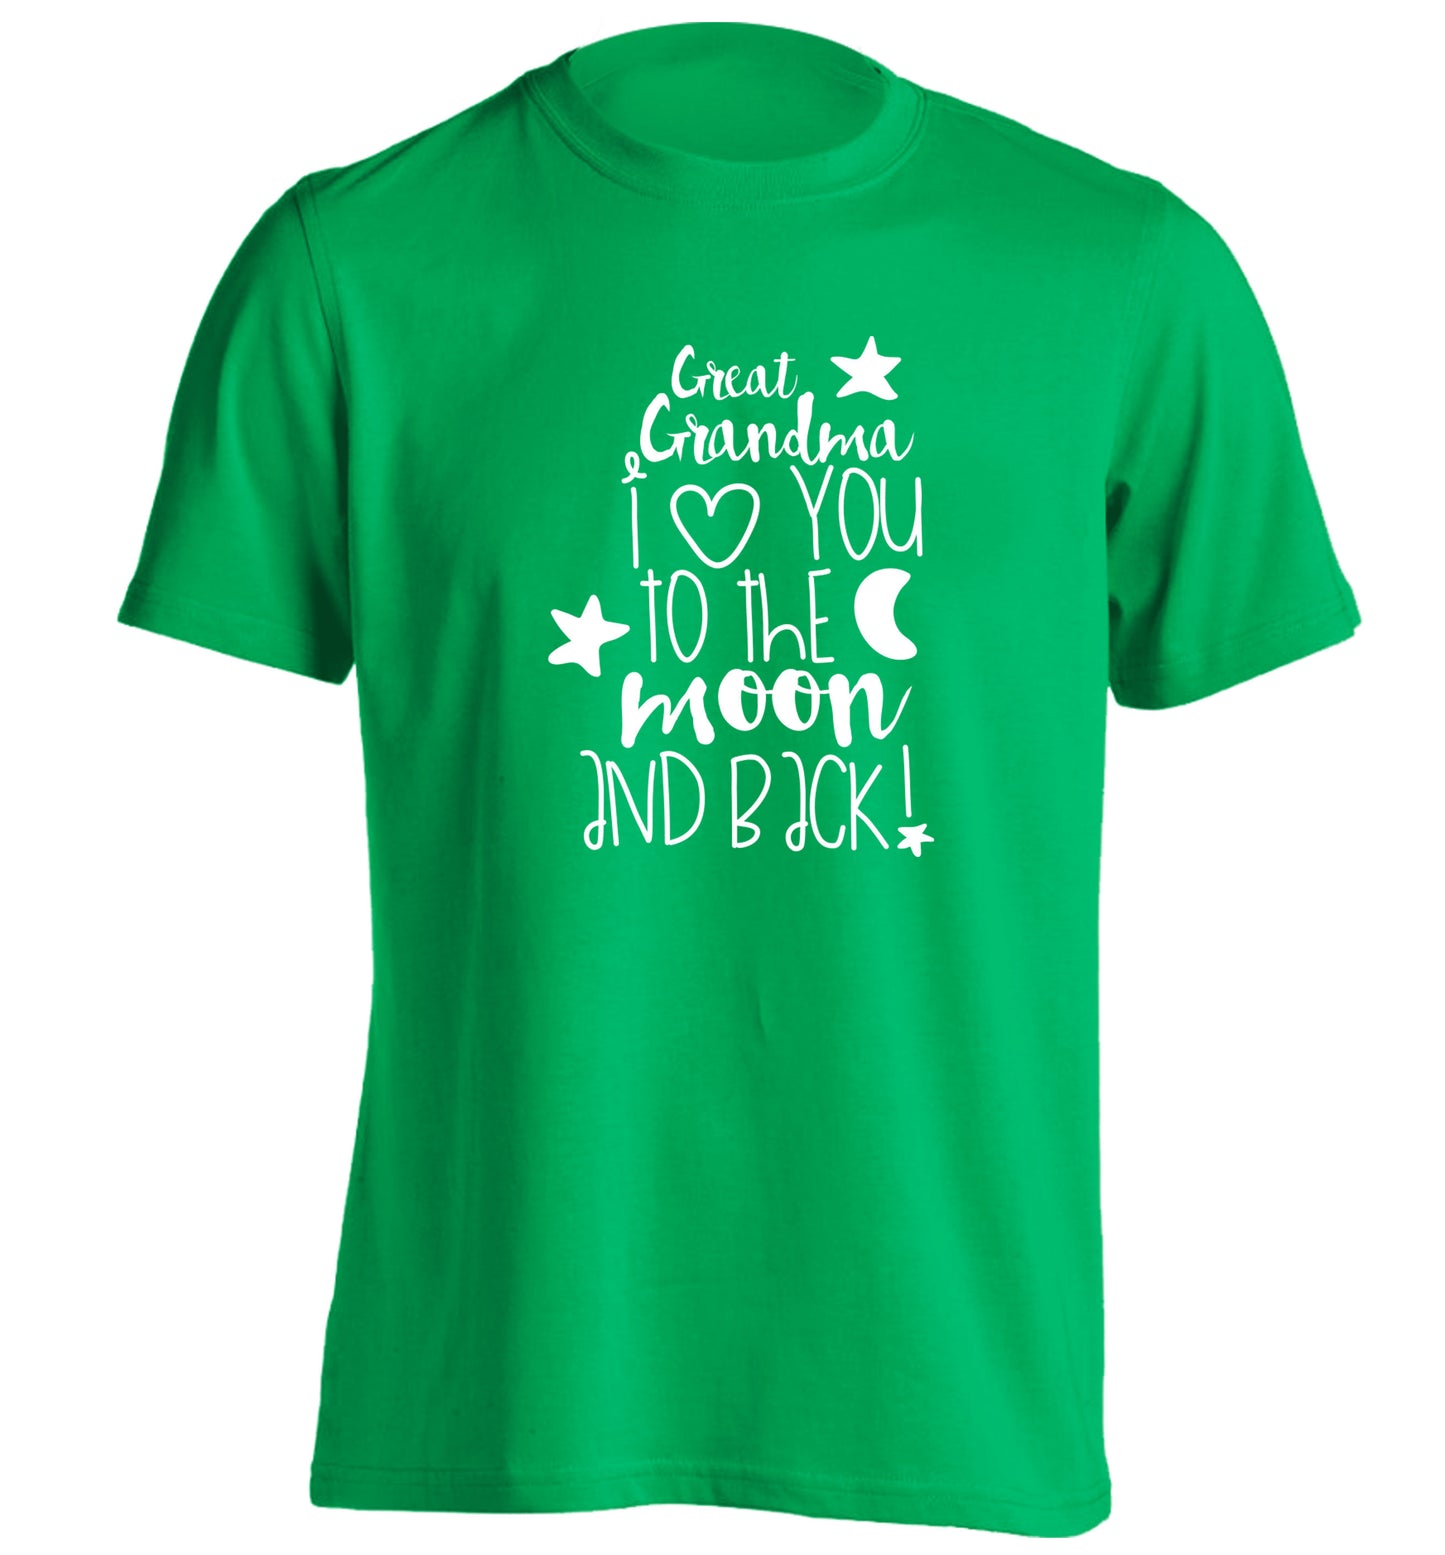 Great Grandma I love you to the moon and back adults unisex green Tshirt 2XL